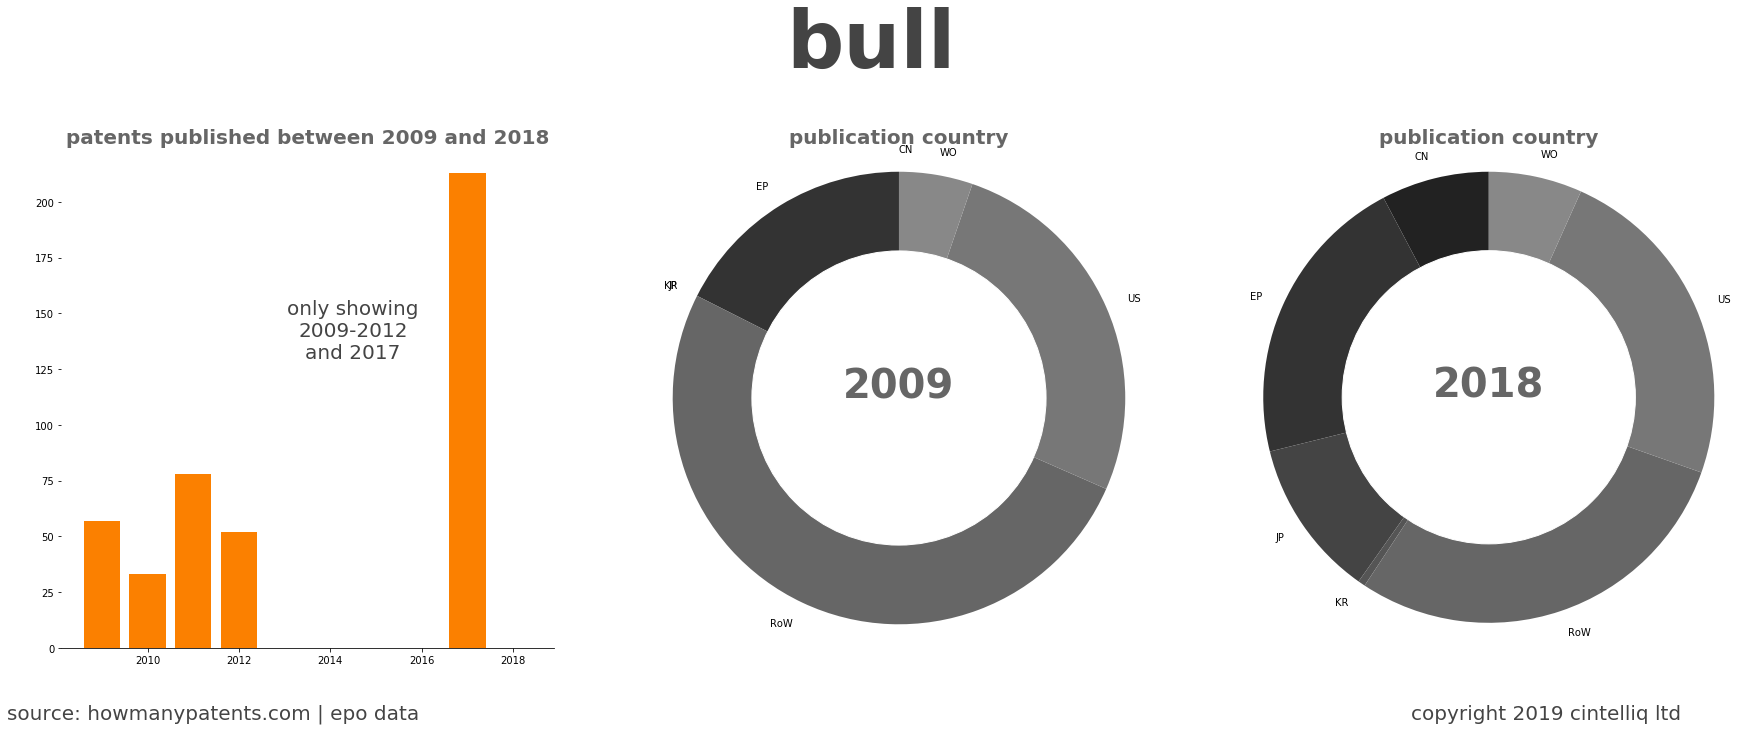 summary of patents for Bull